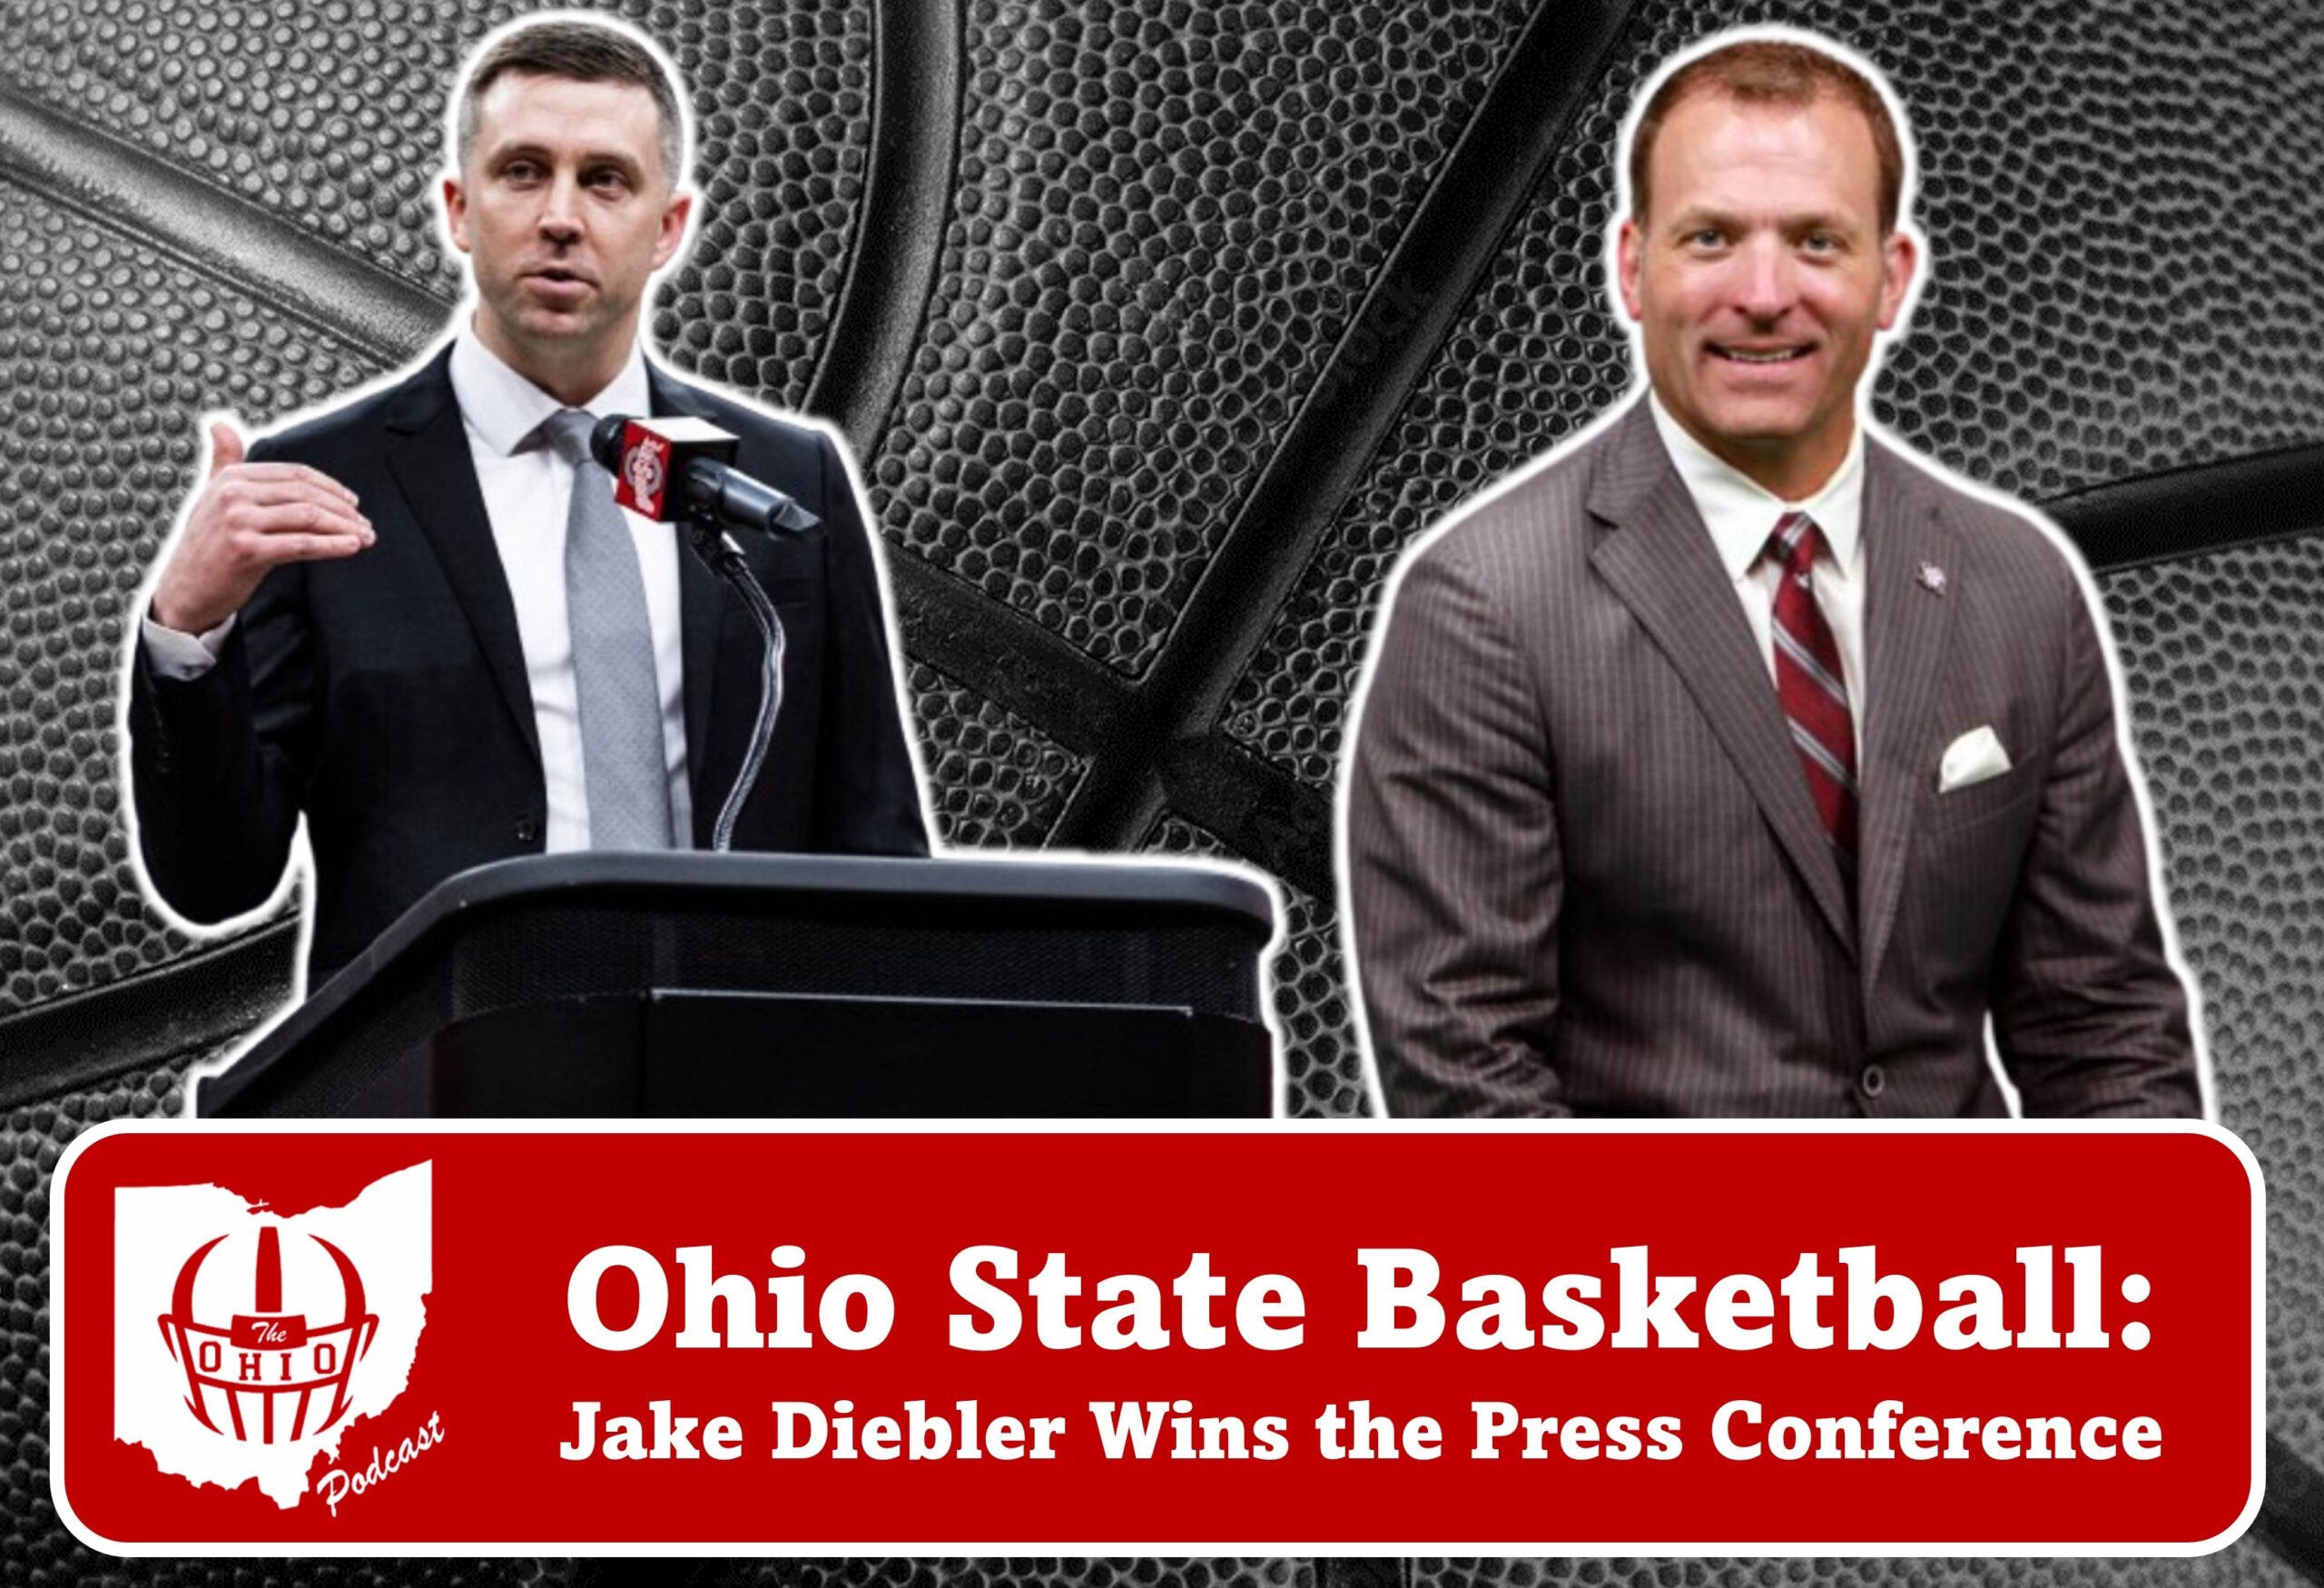 Ohio State Welcomes Jake Diebler as 16th Men’s Basketball Coach